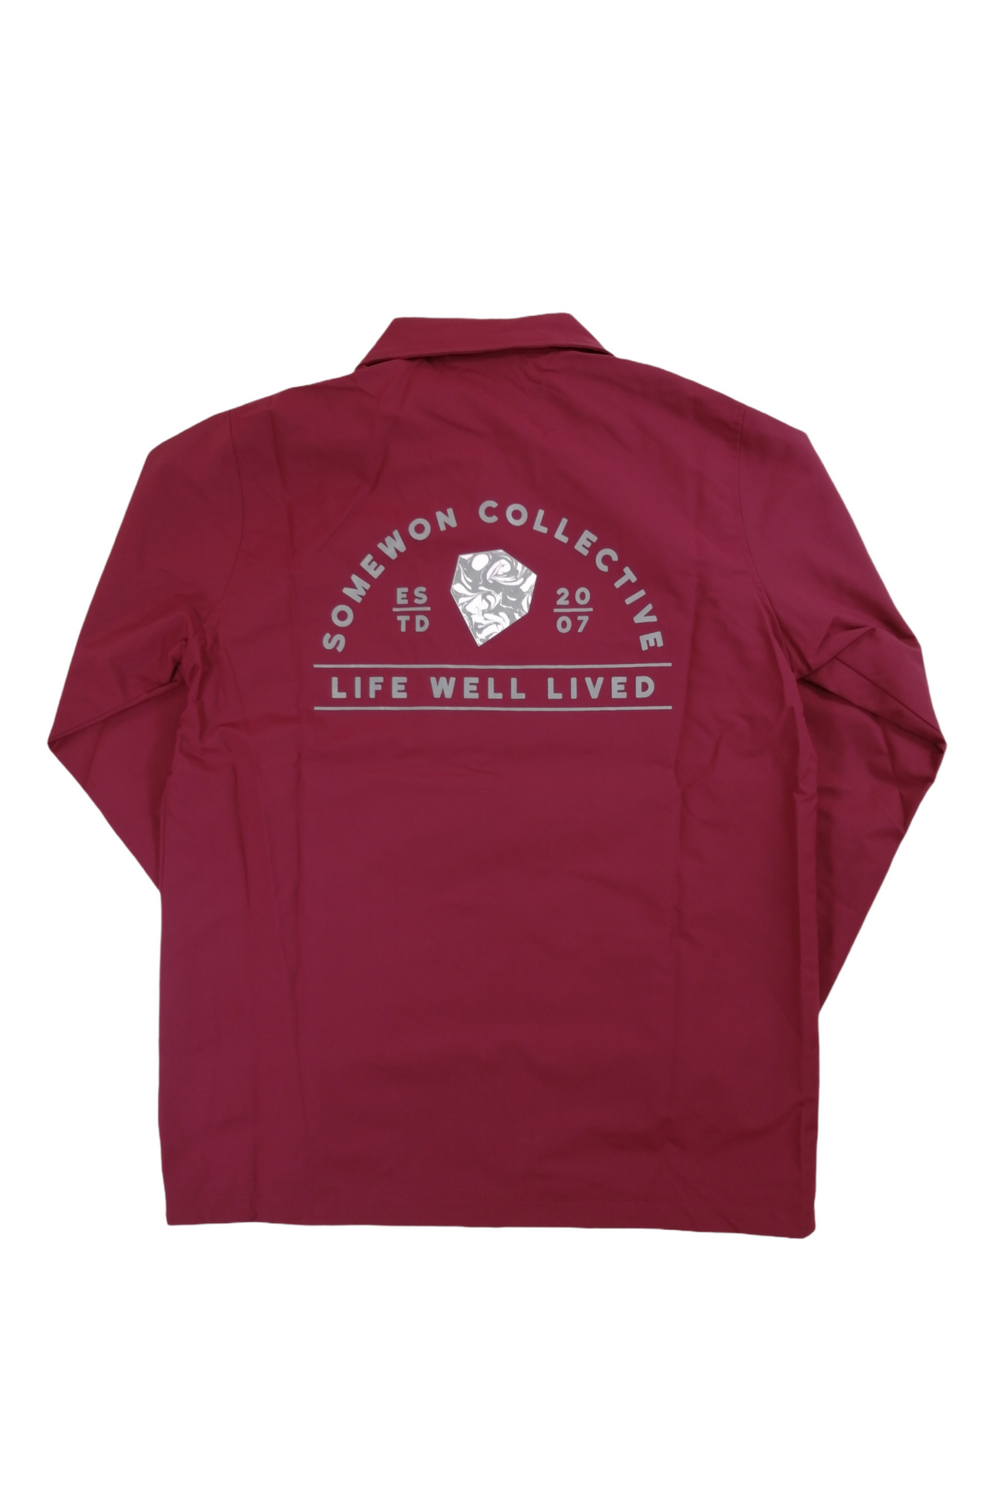 LIFE WELL LIVED COACHES JACKET